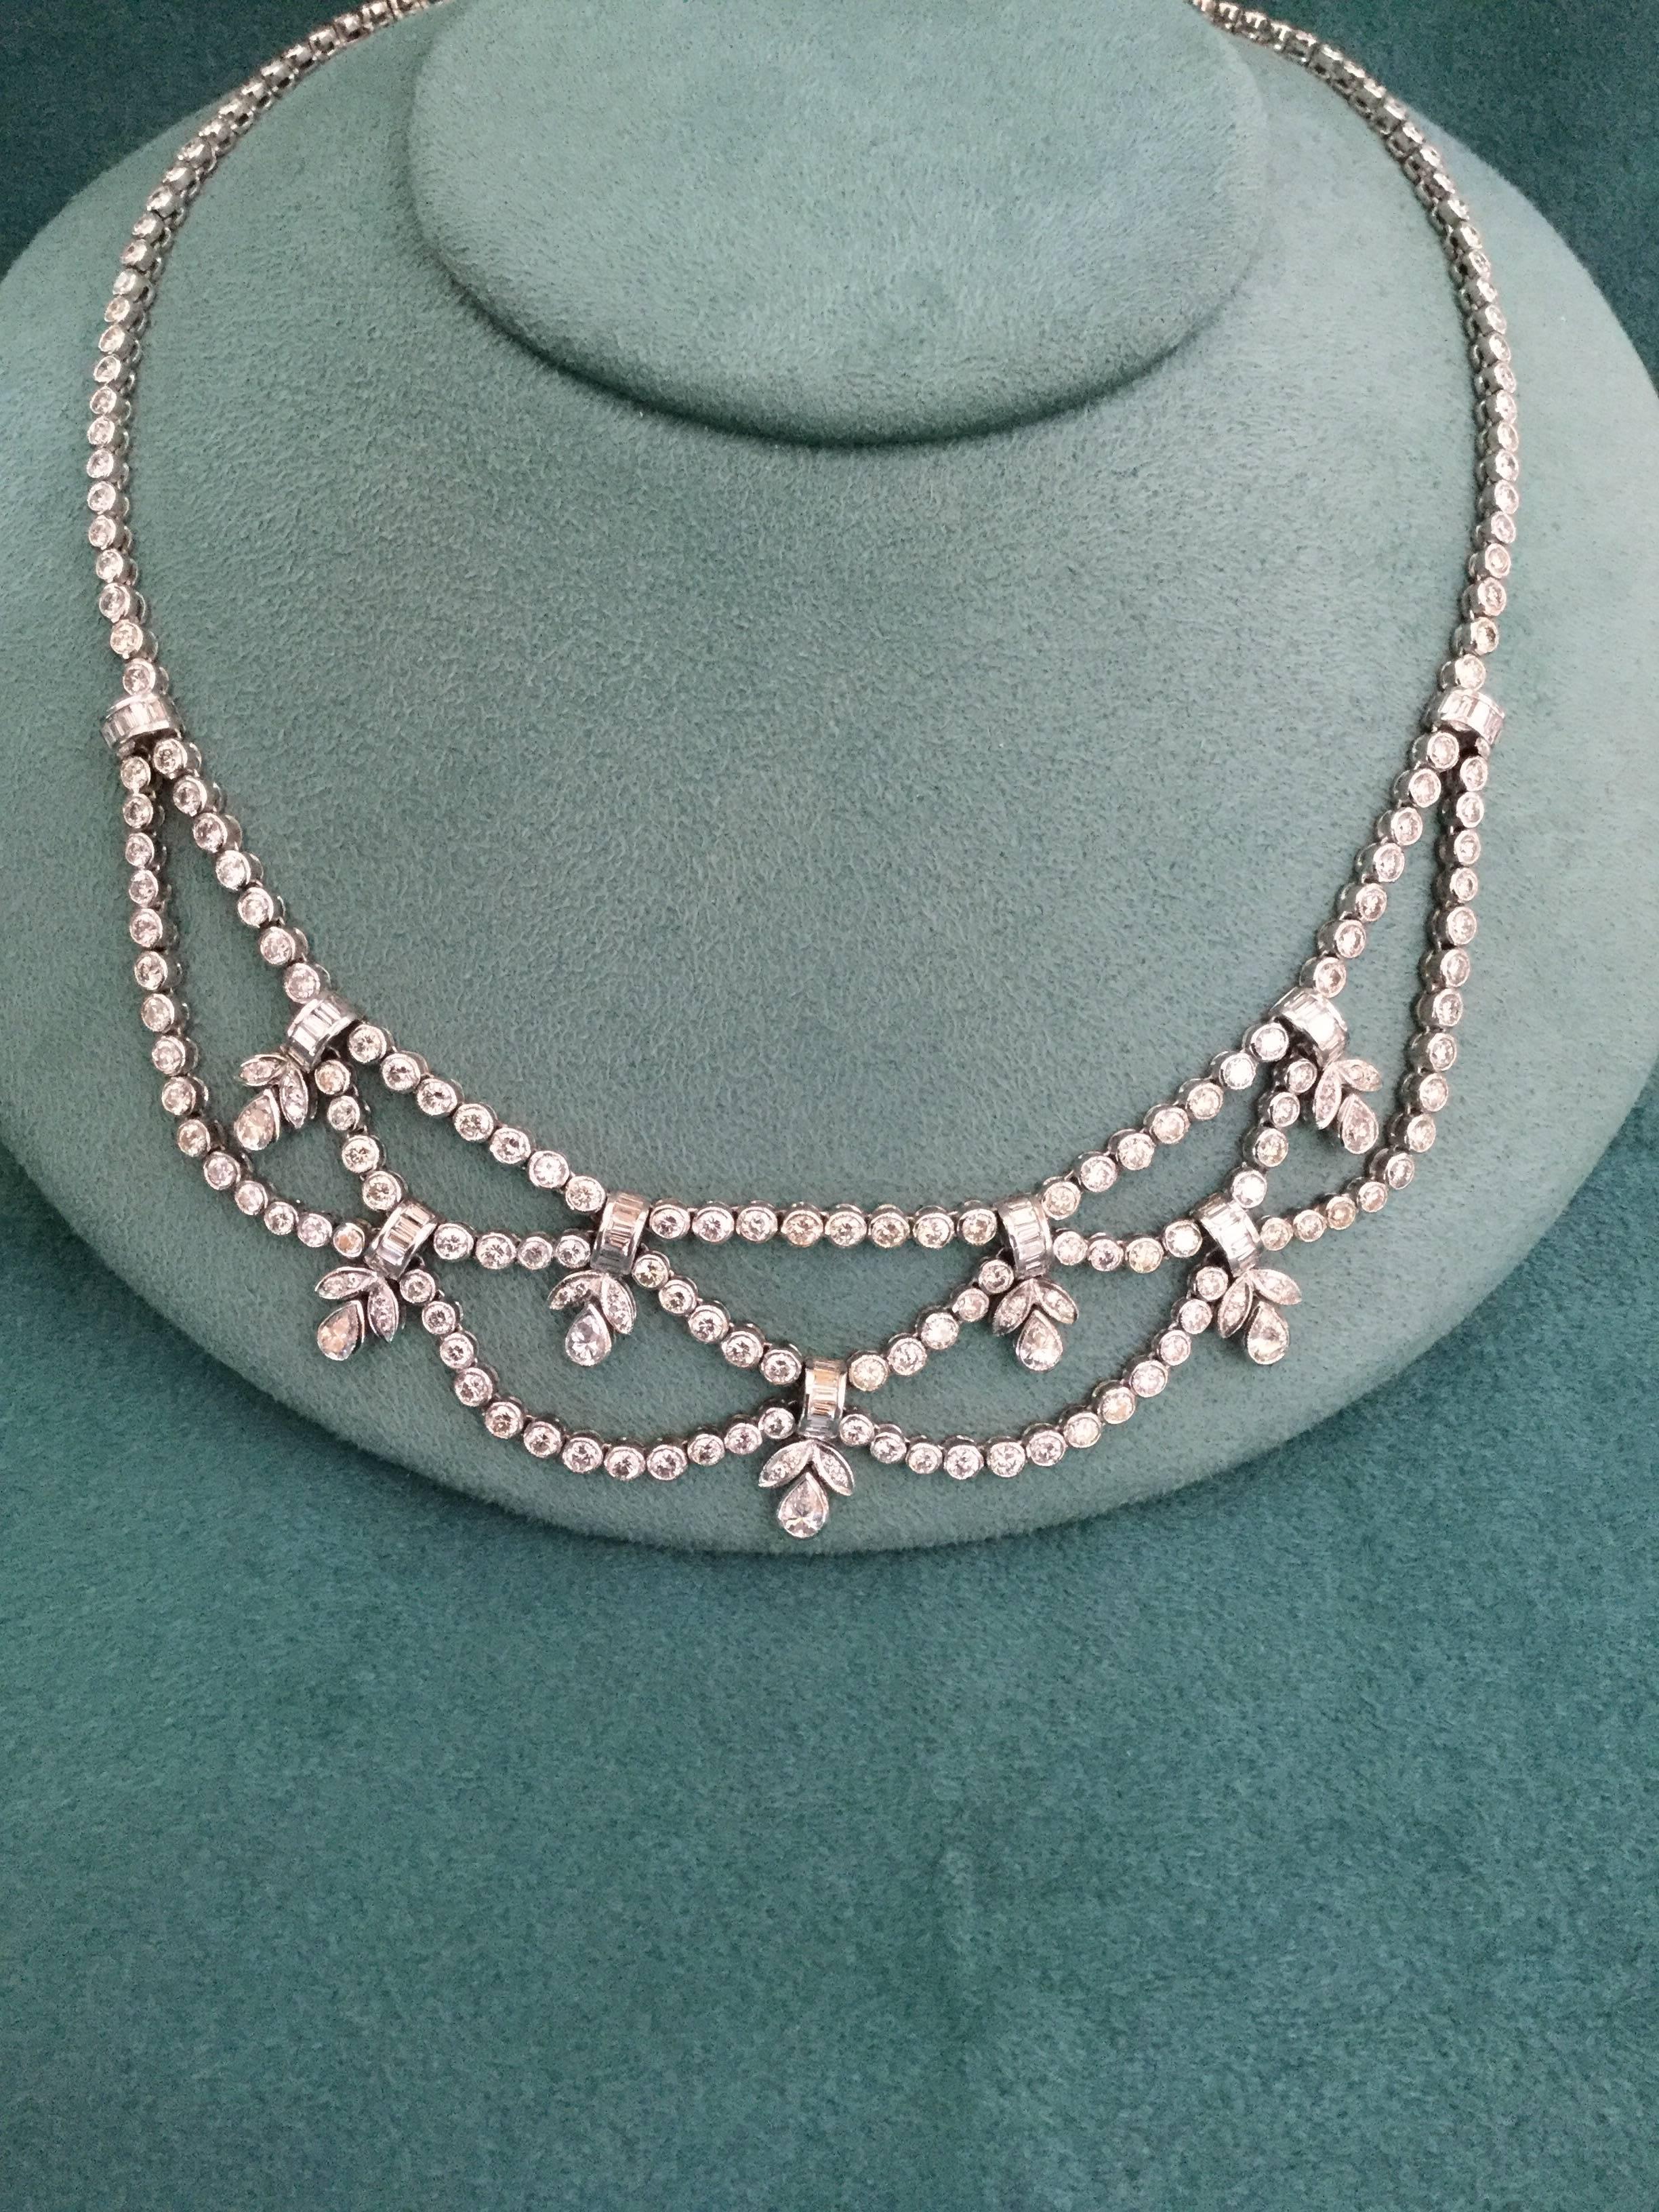 18K white gold necklace containing round, pear shape and baguette diamonds
Approximately 18.50  carats of diamonds. The necklace weighs 45 grams.